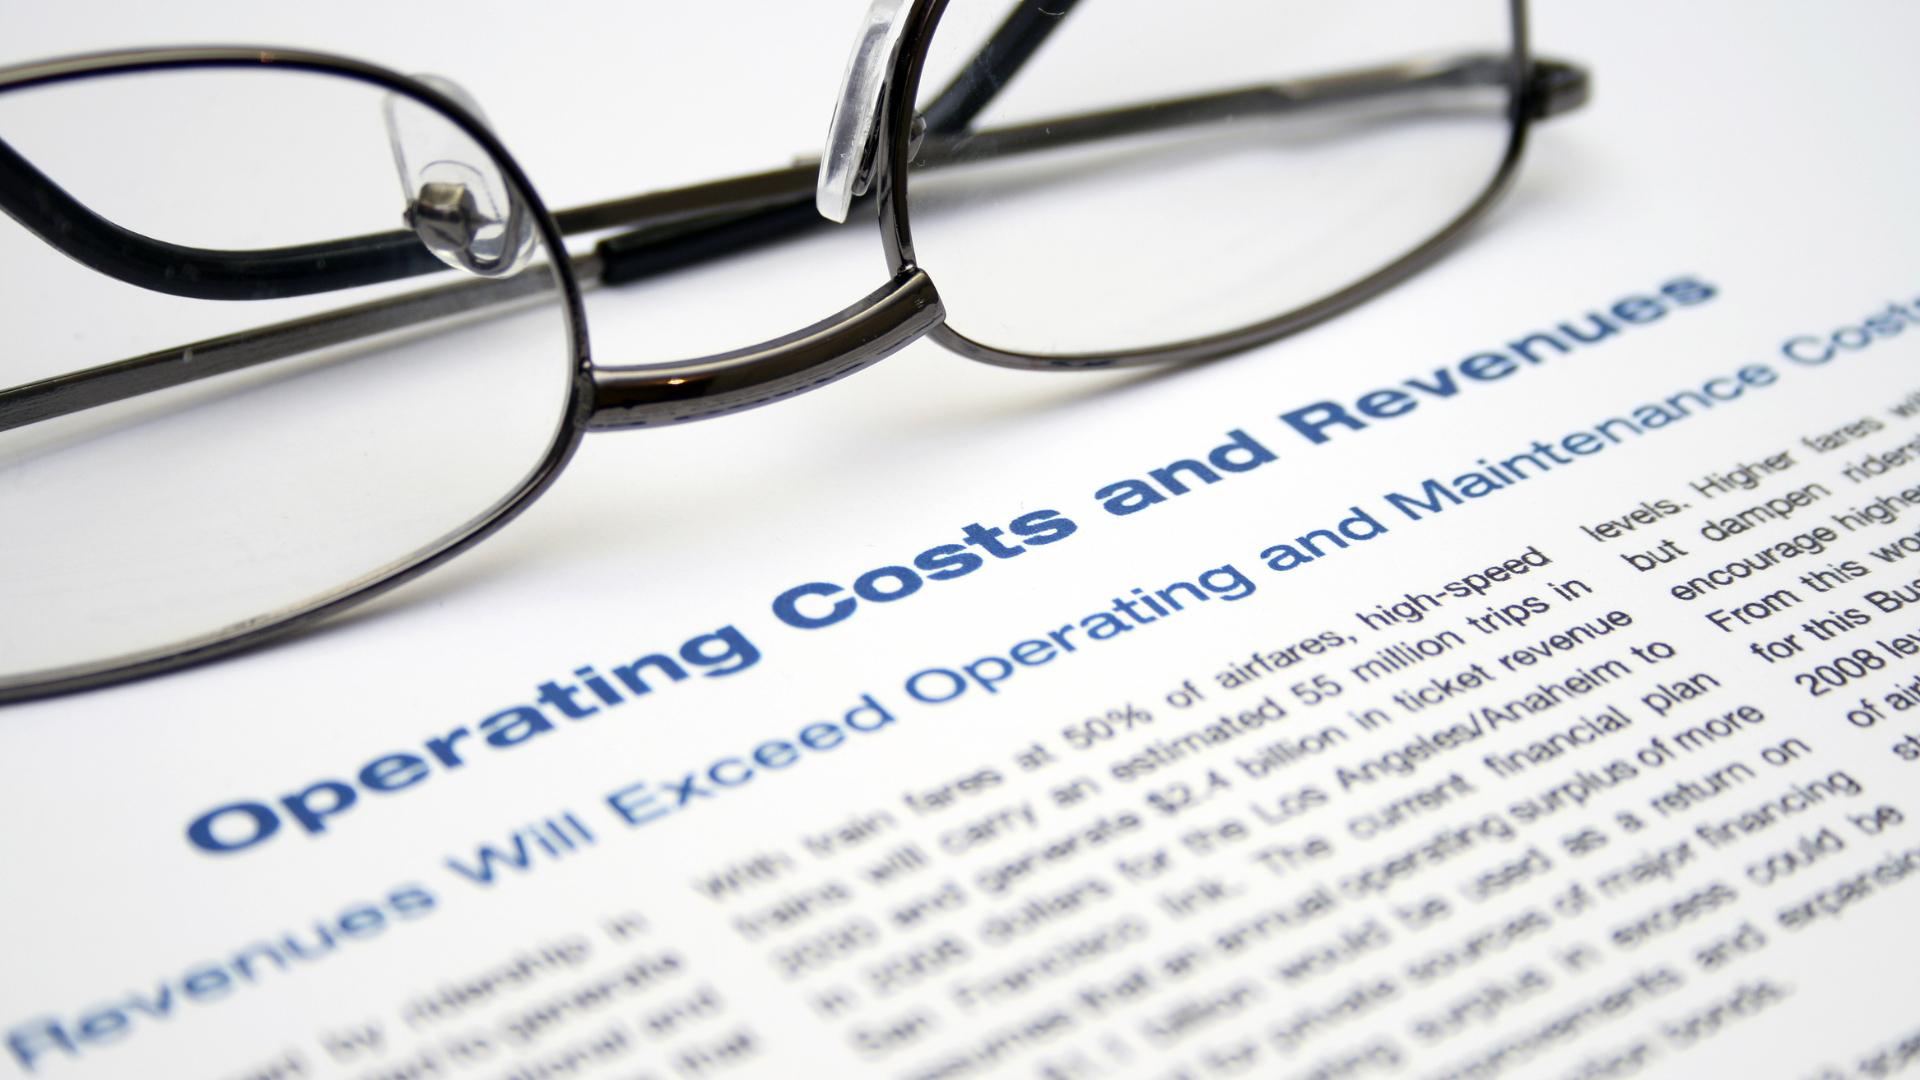 Costs and revenues document